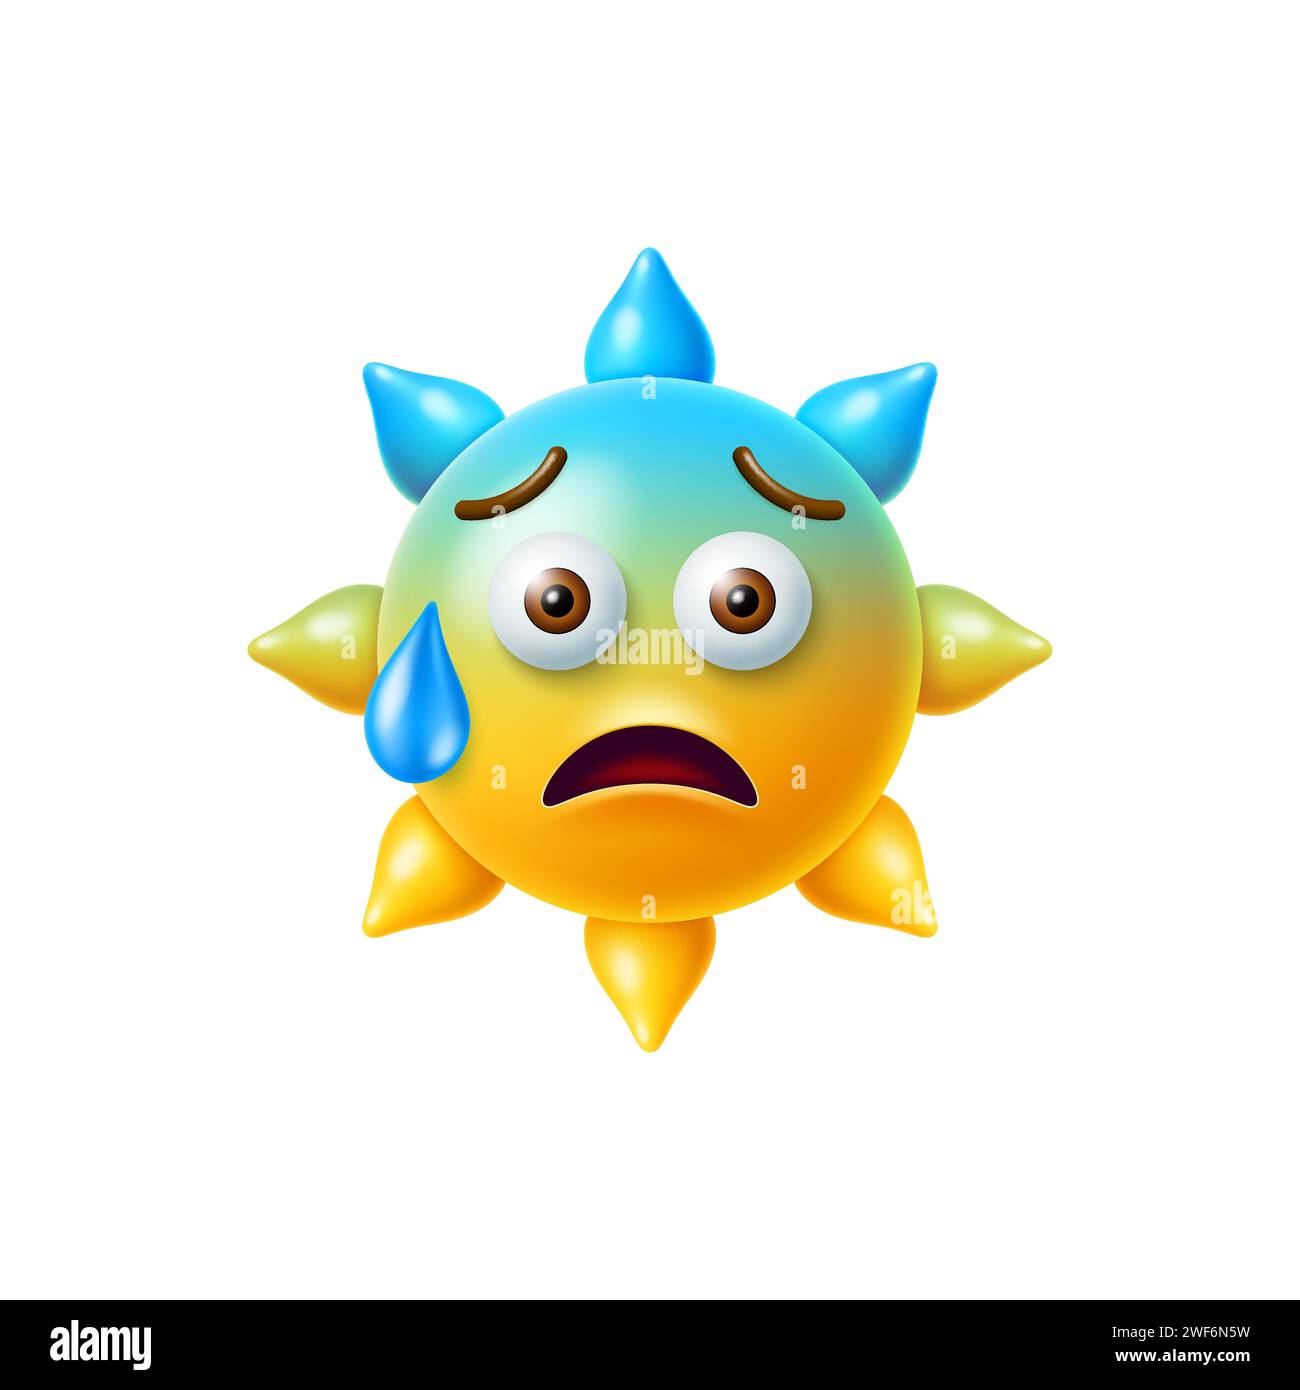 3d sun emoji with anxious face and a bead of sweat, cool and cute yellow sunny character capturing the blend of warmth, shock and nervousness. Isolated vector scared or unhappy emoticon for app chat Stock Vector